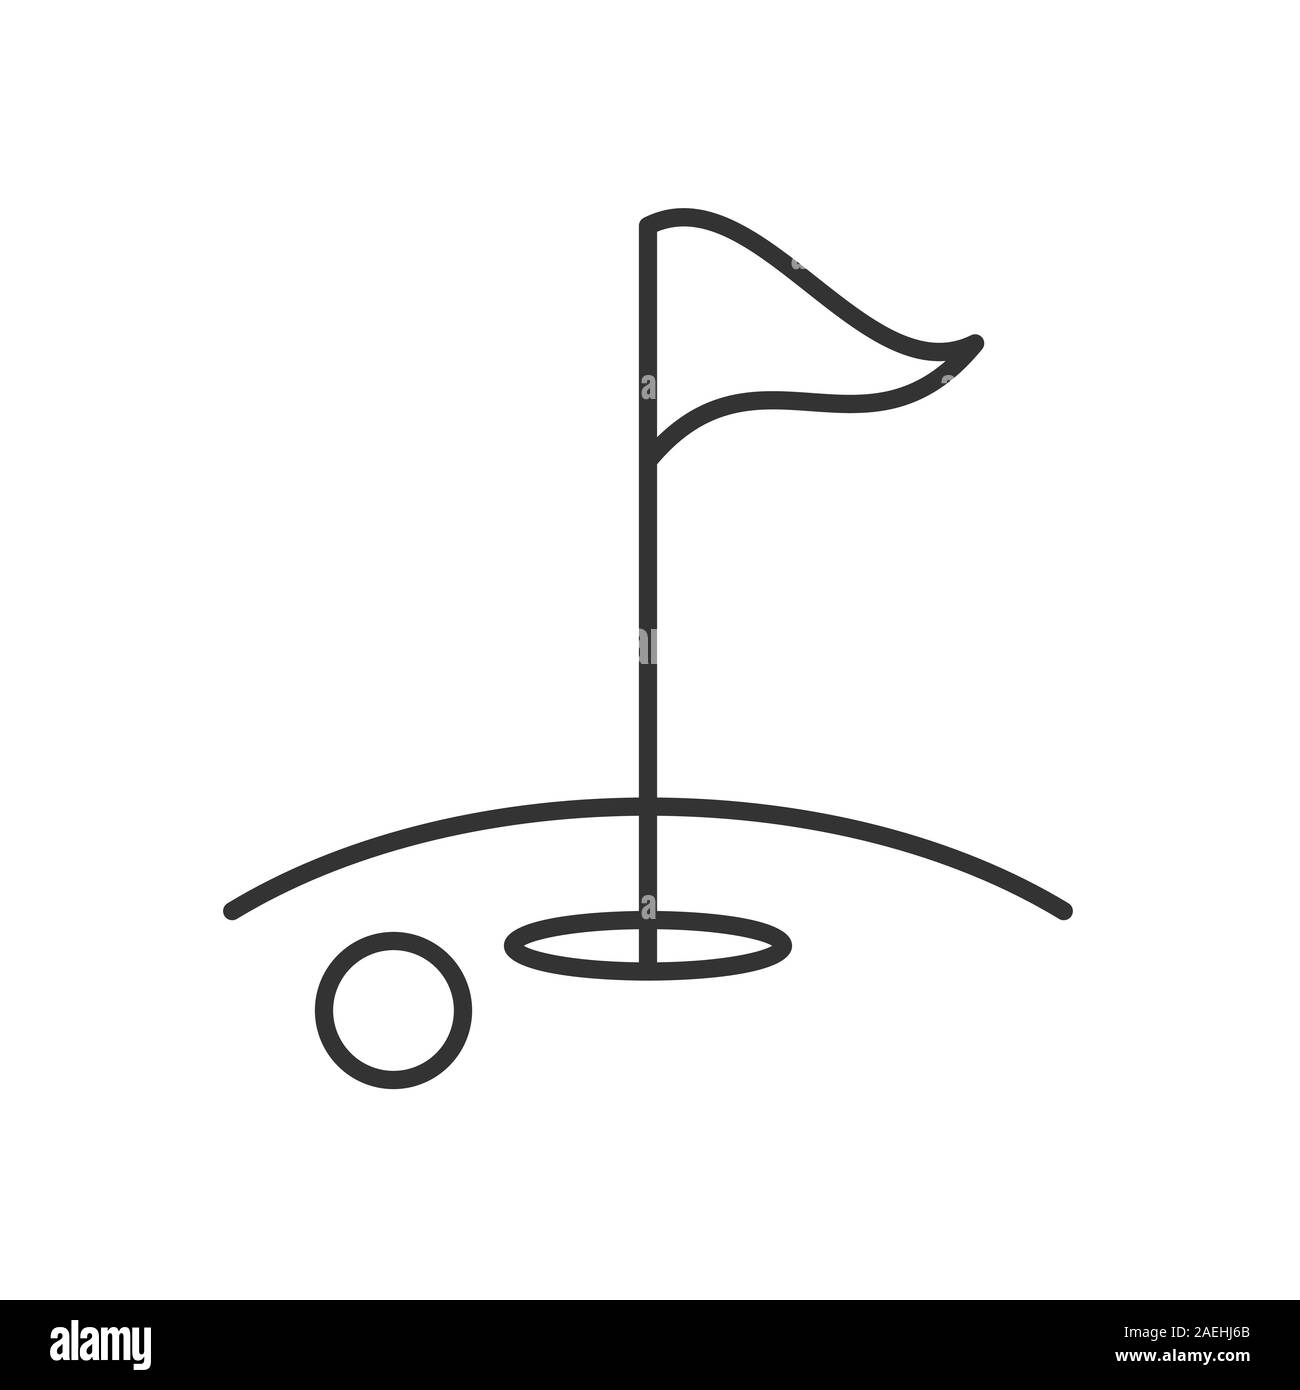 How to draw golf course with flags » Easy-To-Draw.com